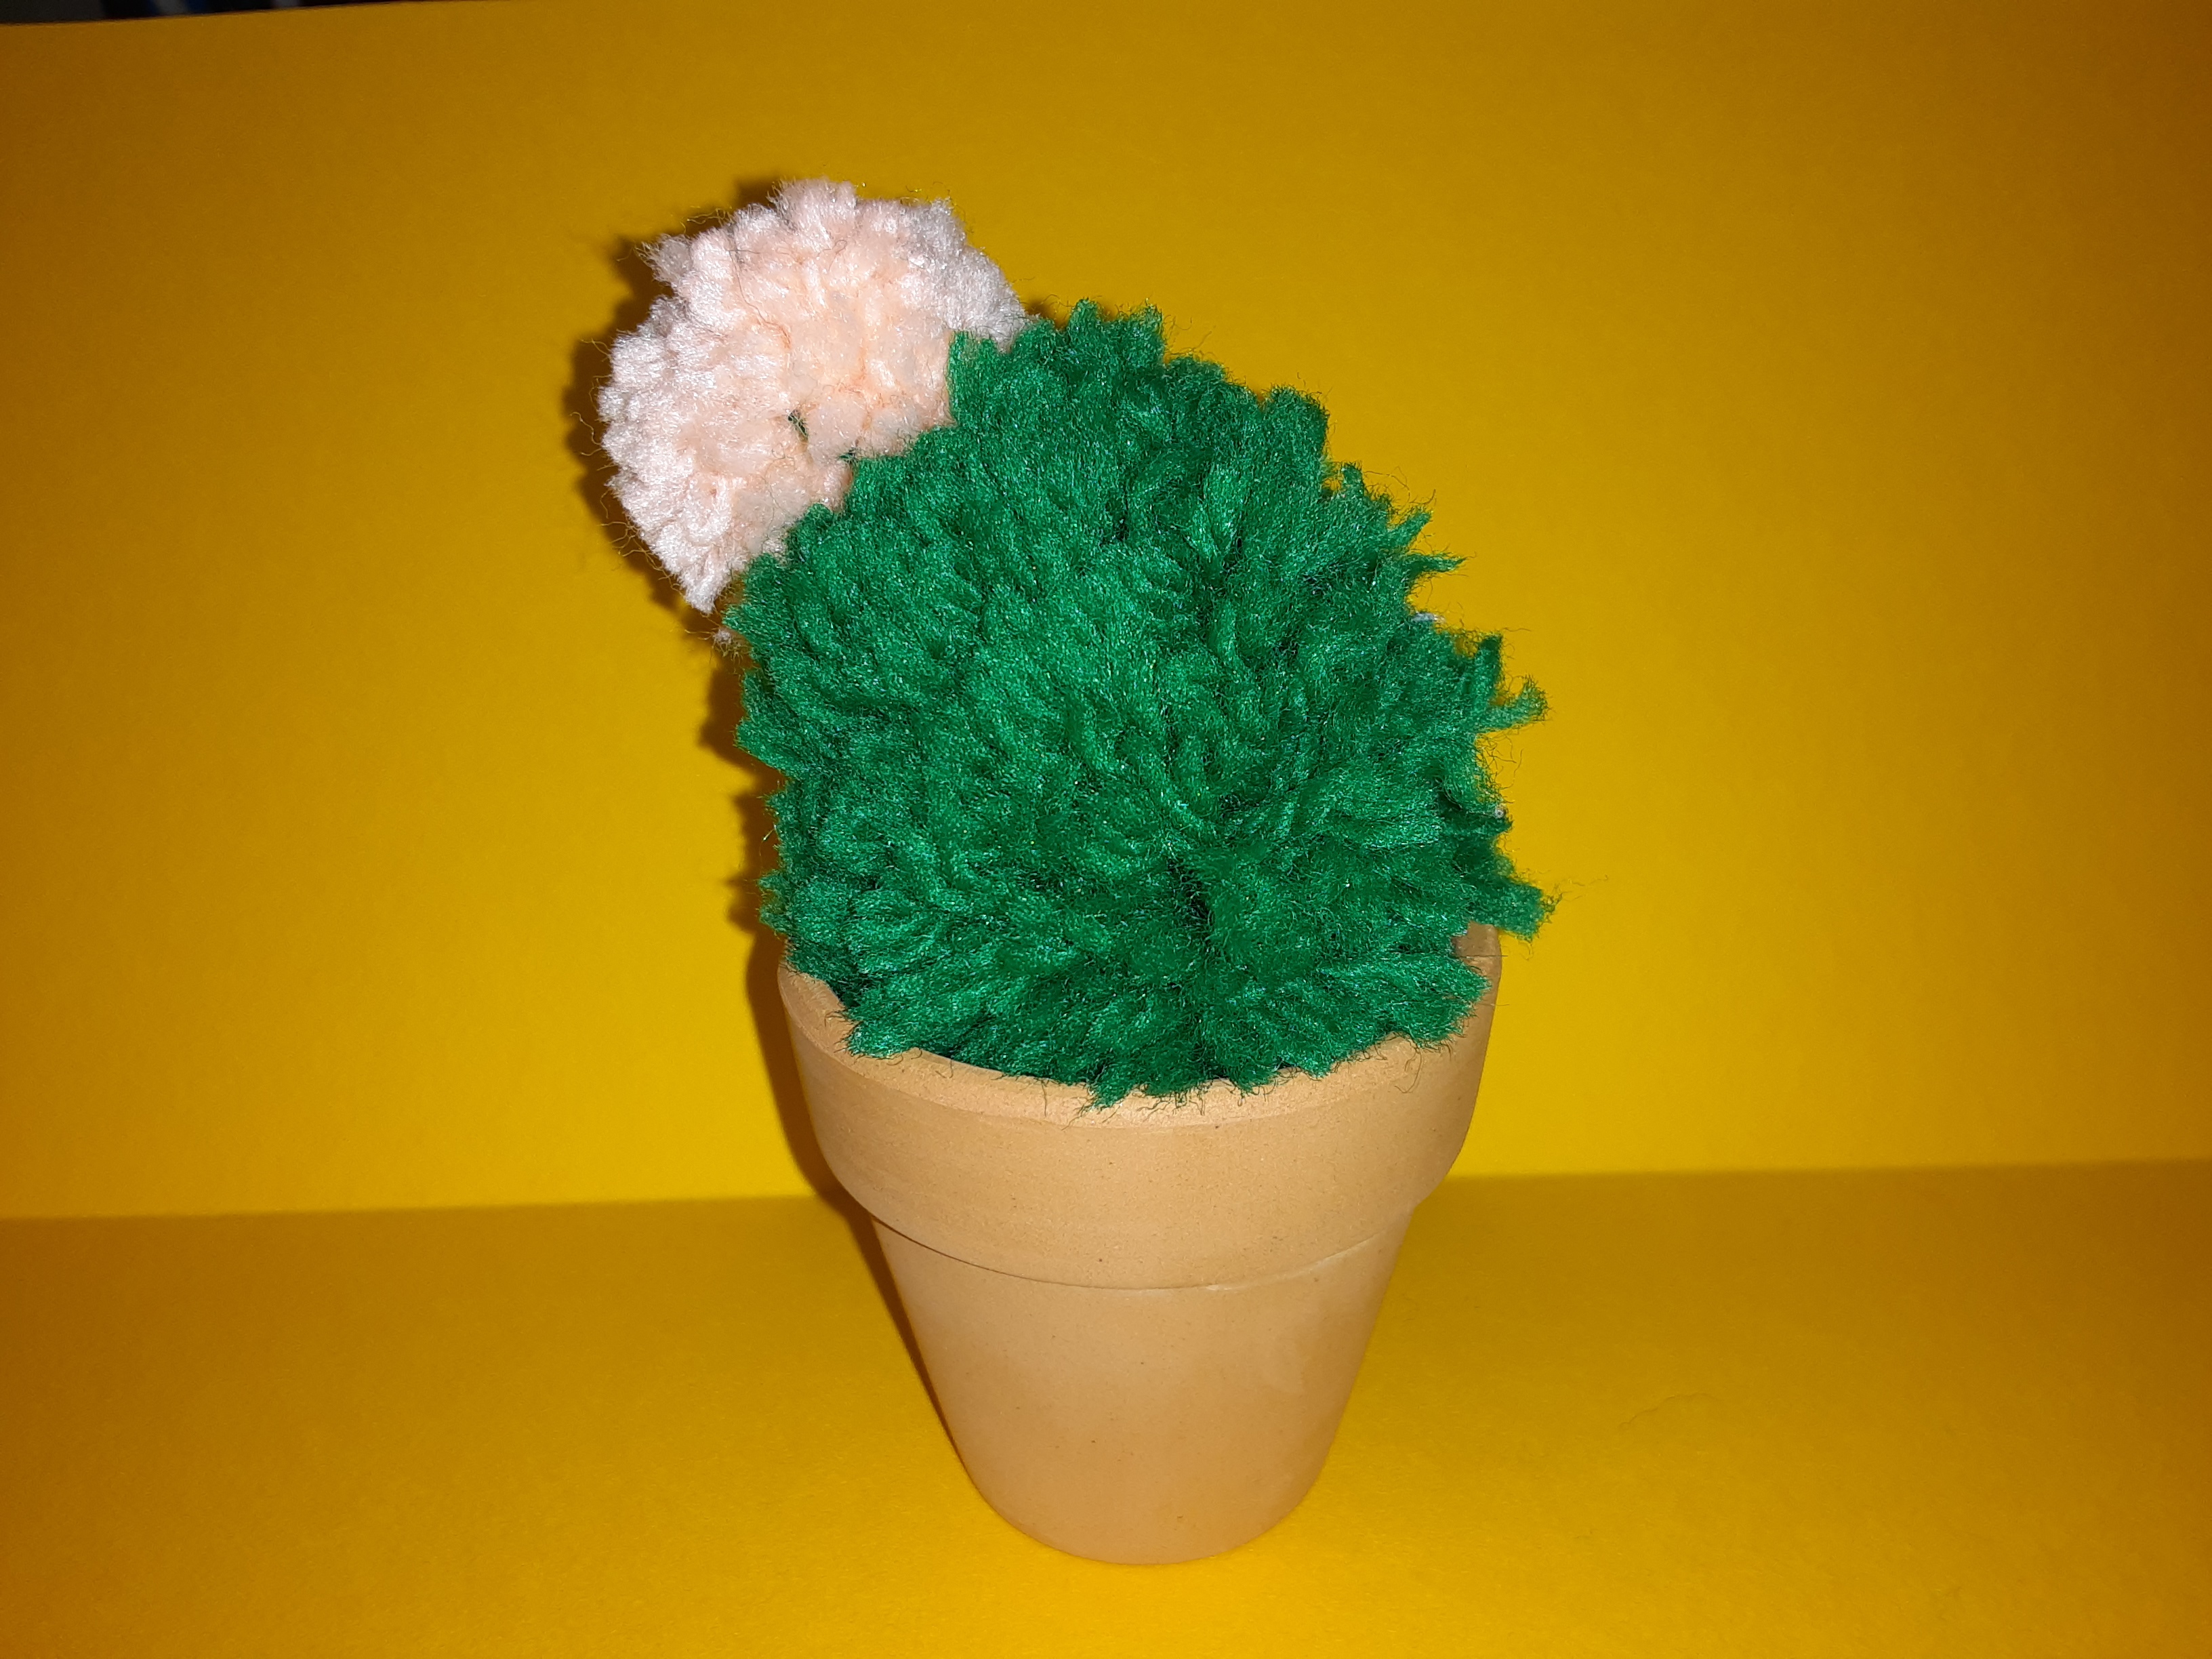 A small flowering cactus made of yarn in a 2" clay pot